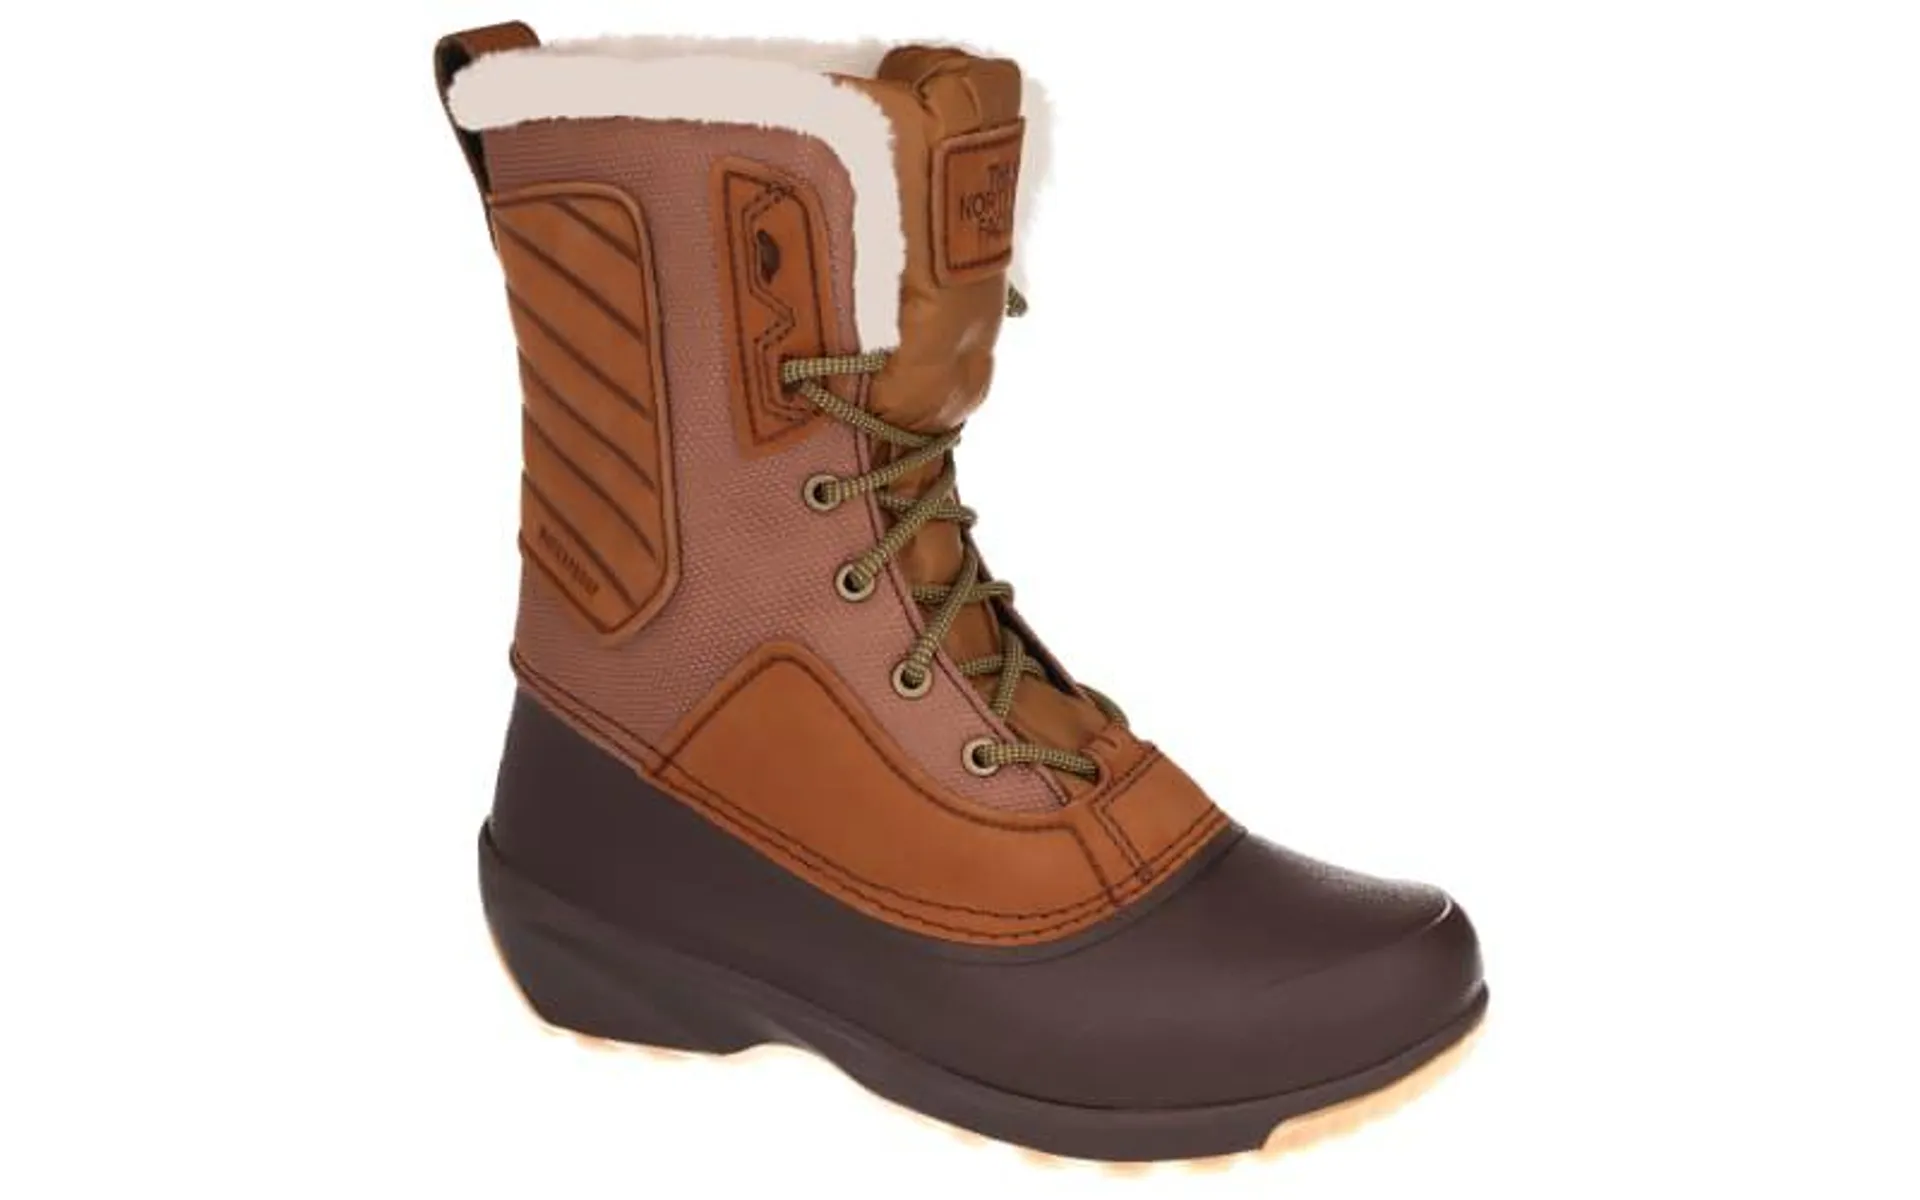 The North Face Shellista IV Mid Insulated Waterproof Pac Boots for Ladies